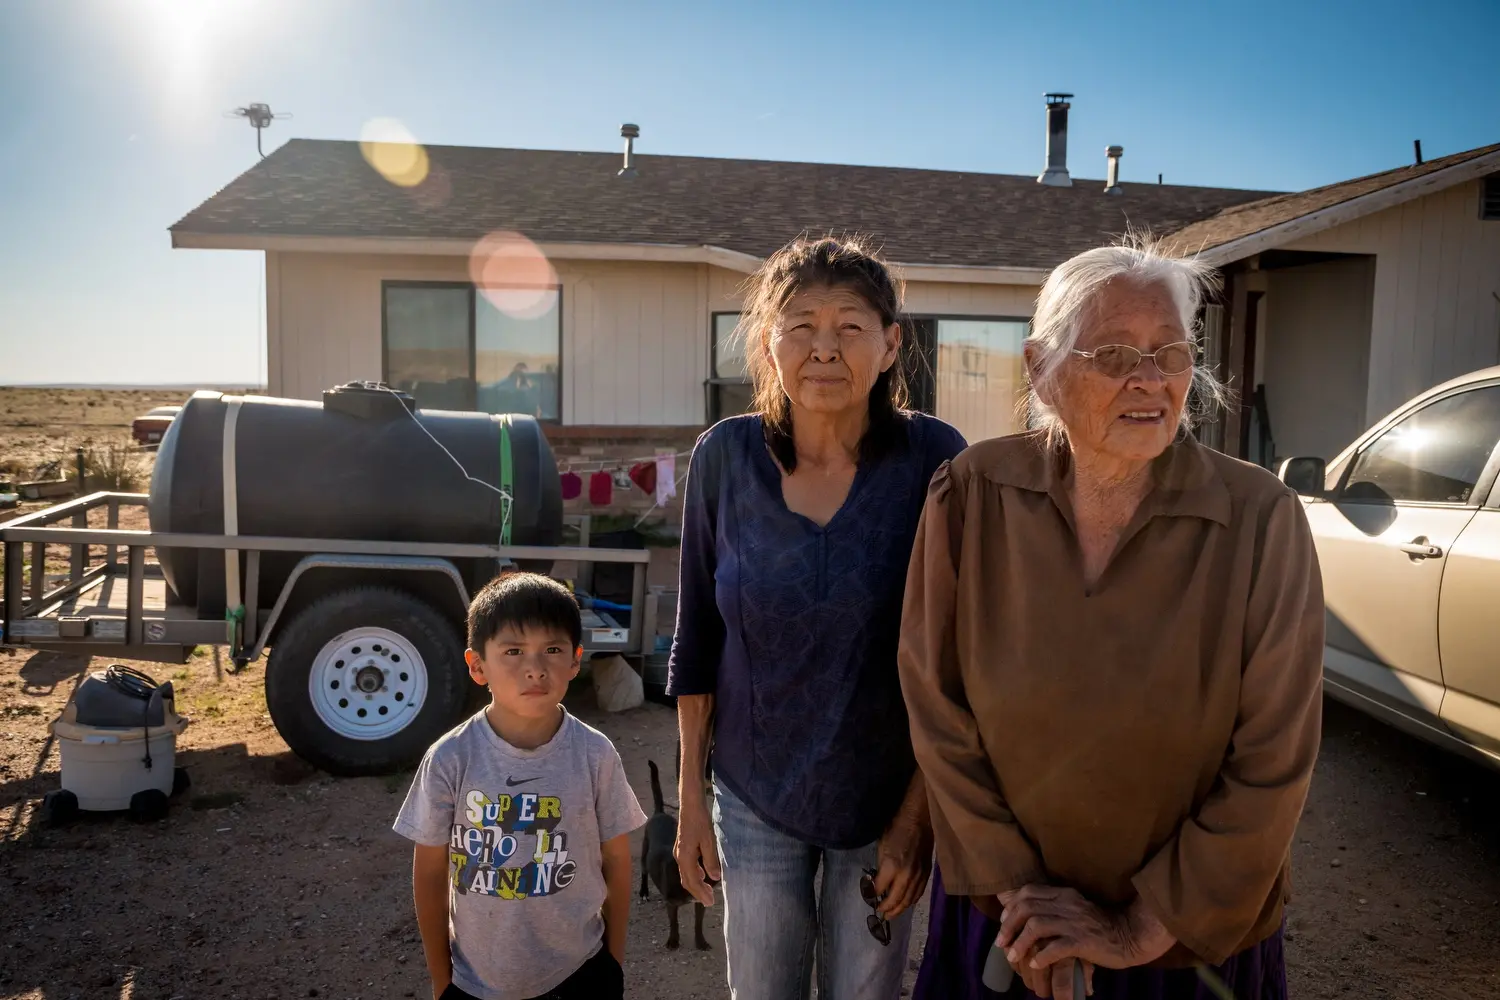 Cecilia Joe, her daughter Augusta Gillwood and Ryan Joe Jr. at their home near Tuba City. Image by Mary F. Calvert. United States, 2020.